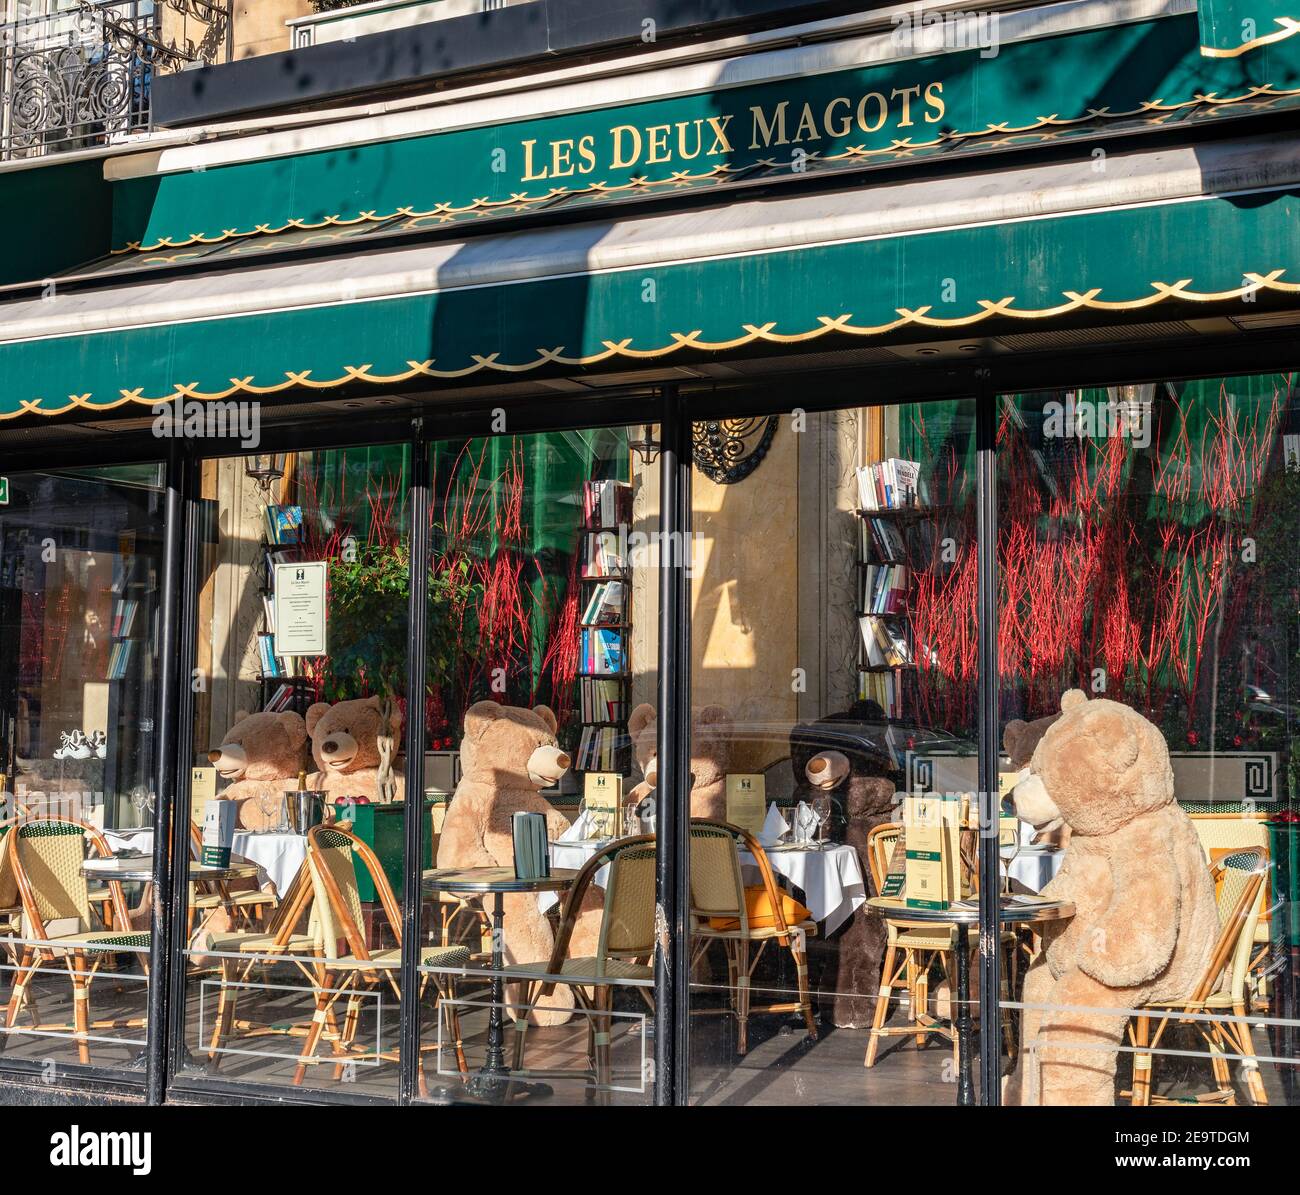 Teddy bears in cafe Les Deux Magots during Covid-19 Lockdown in Paris, France Stock Photo